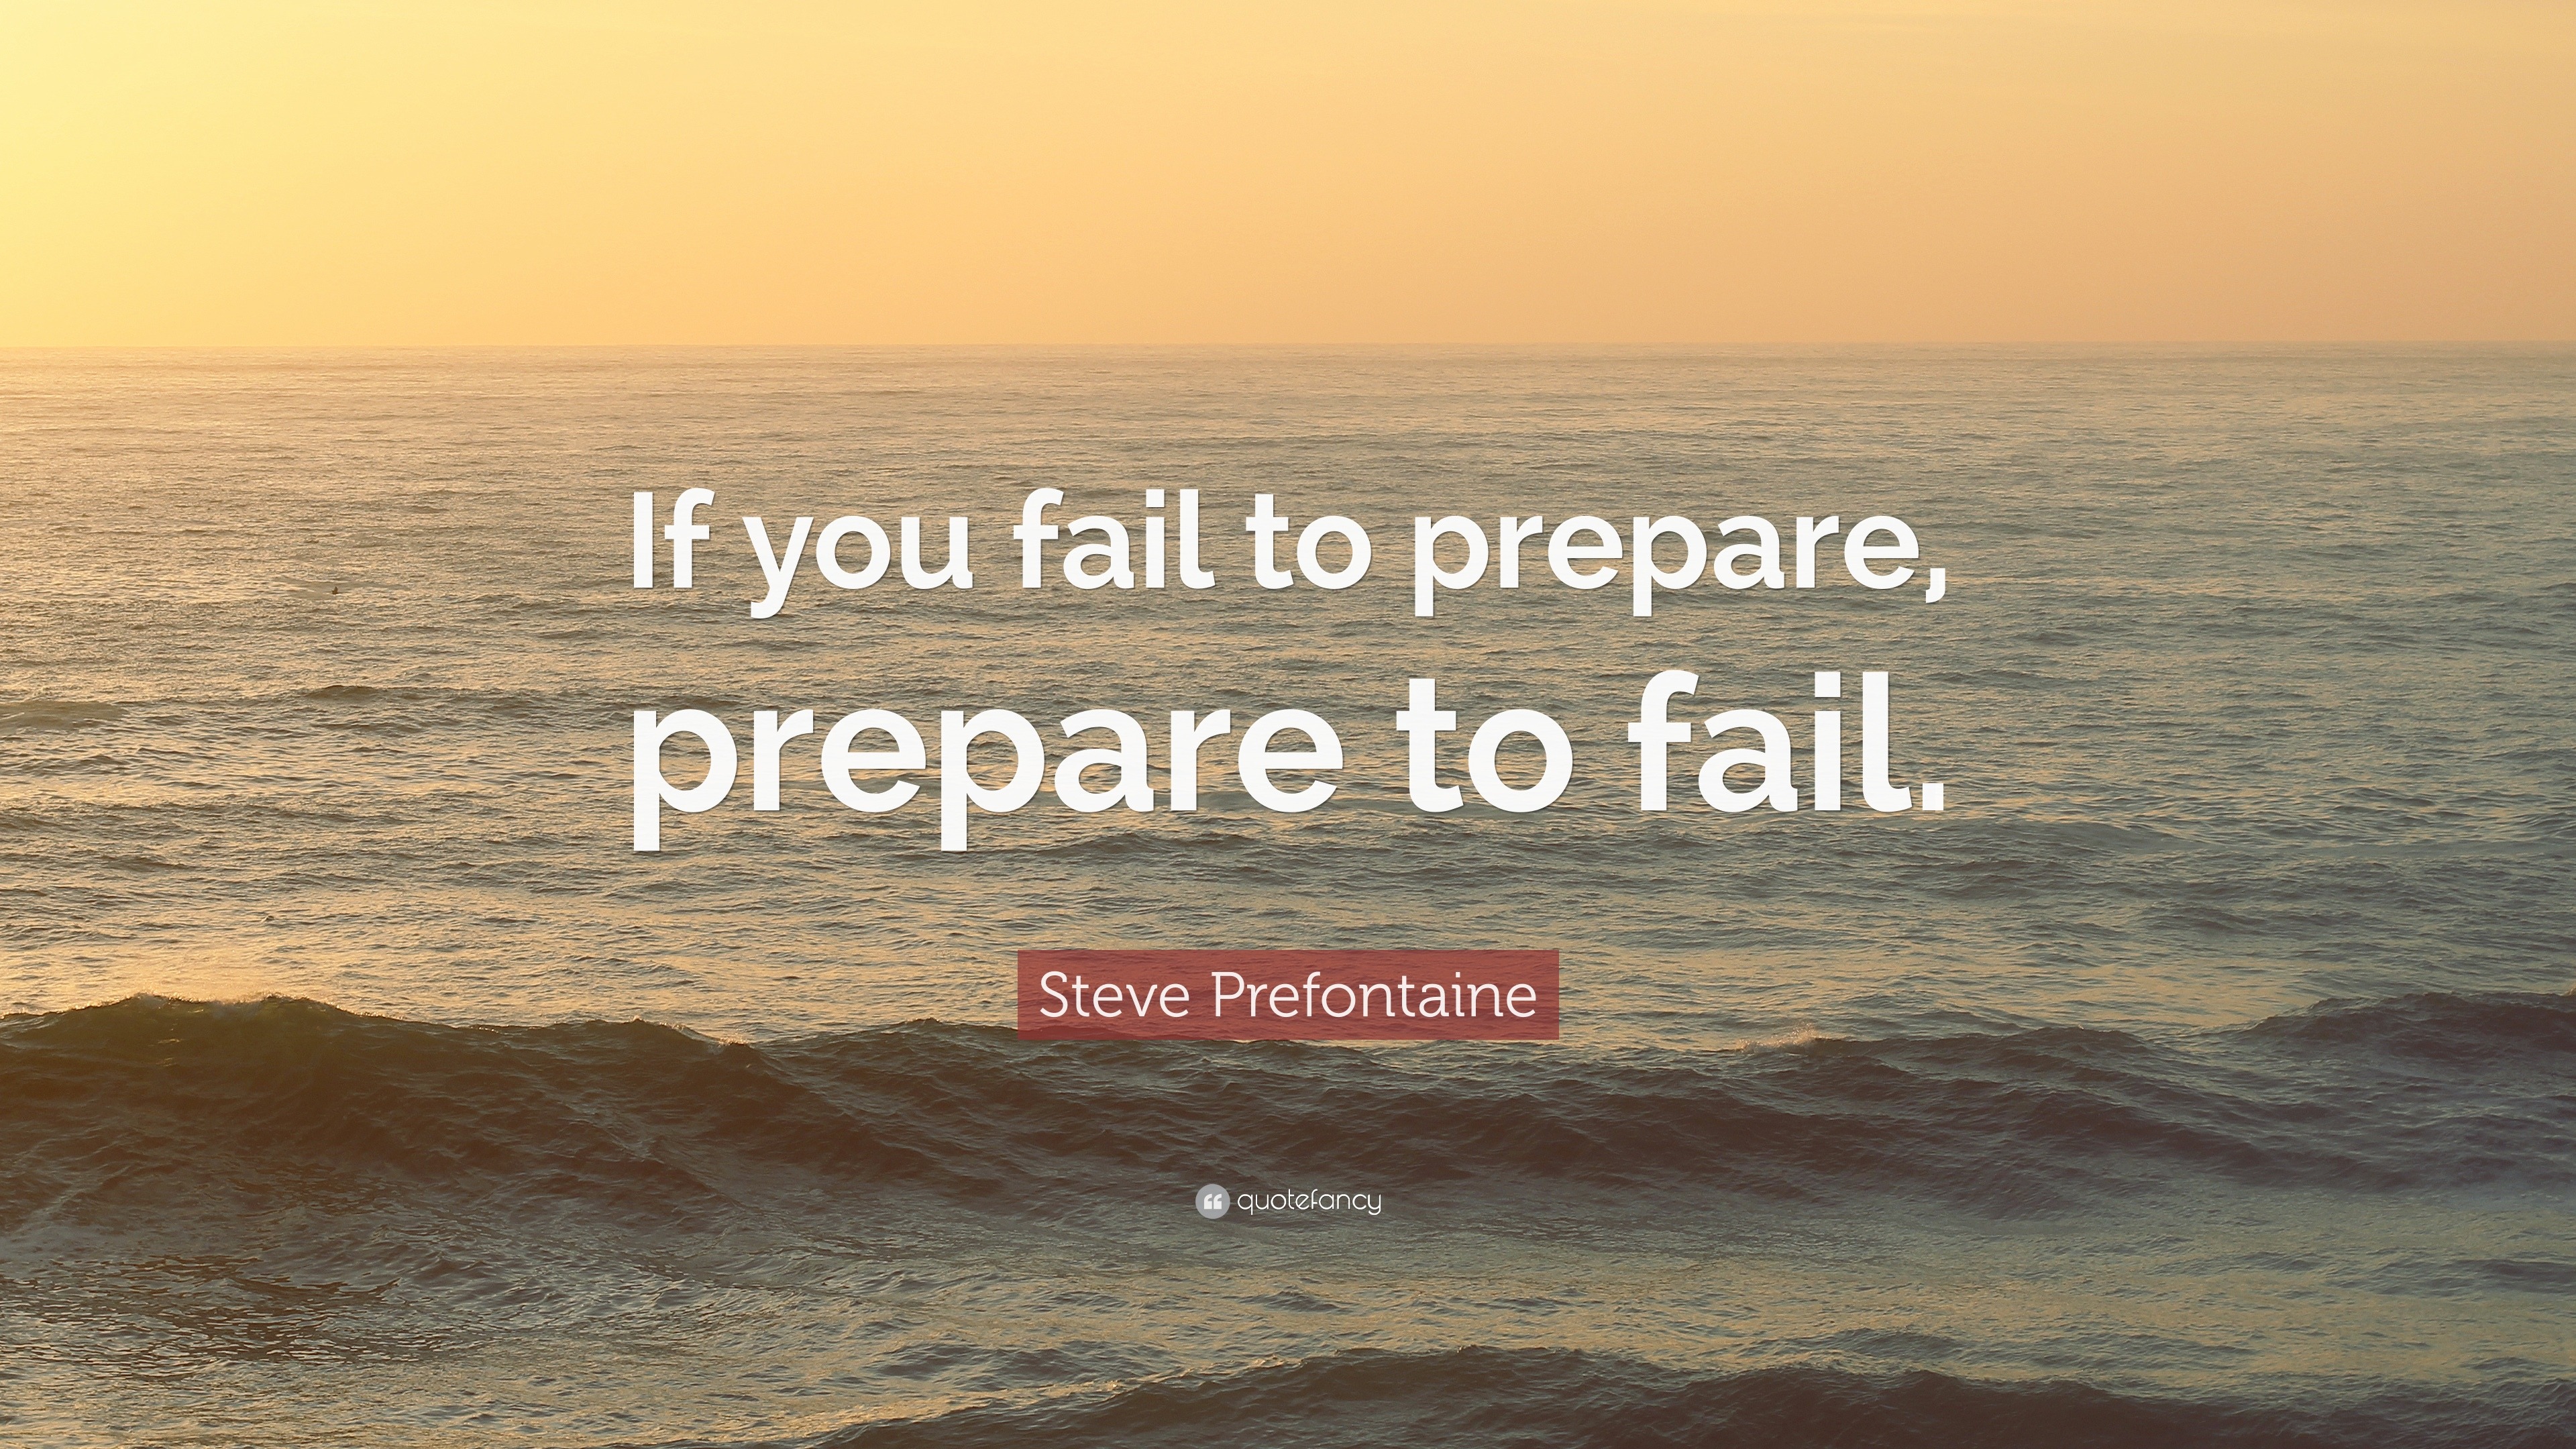 Steve Prefontaine Quote: “If you fail to prepare, prepare to fail.” (12